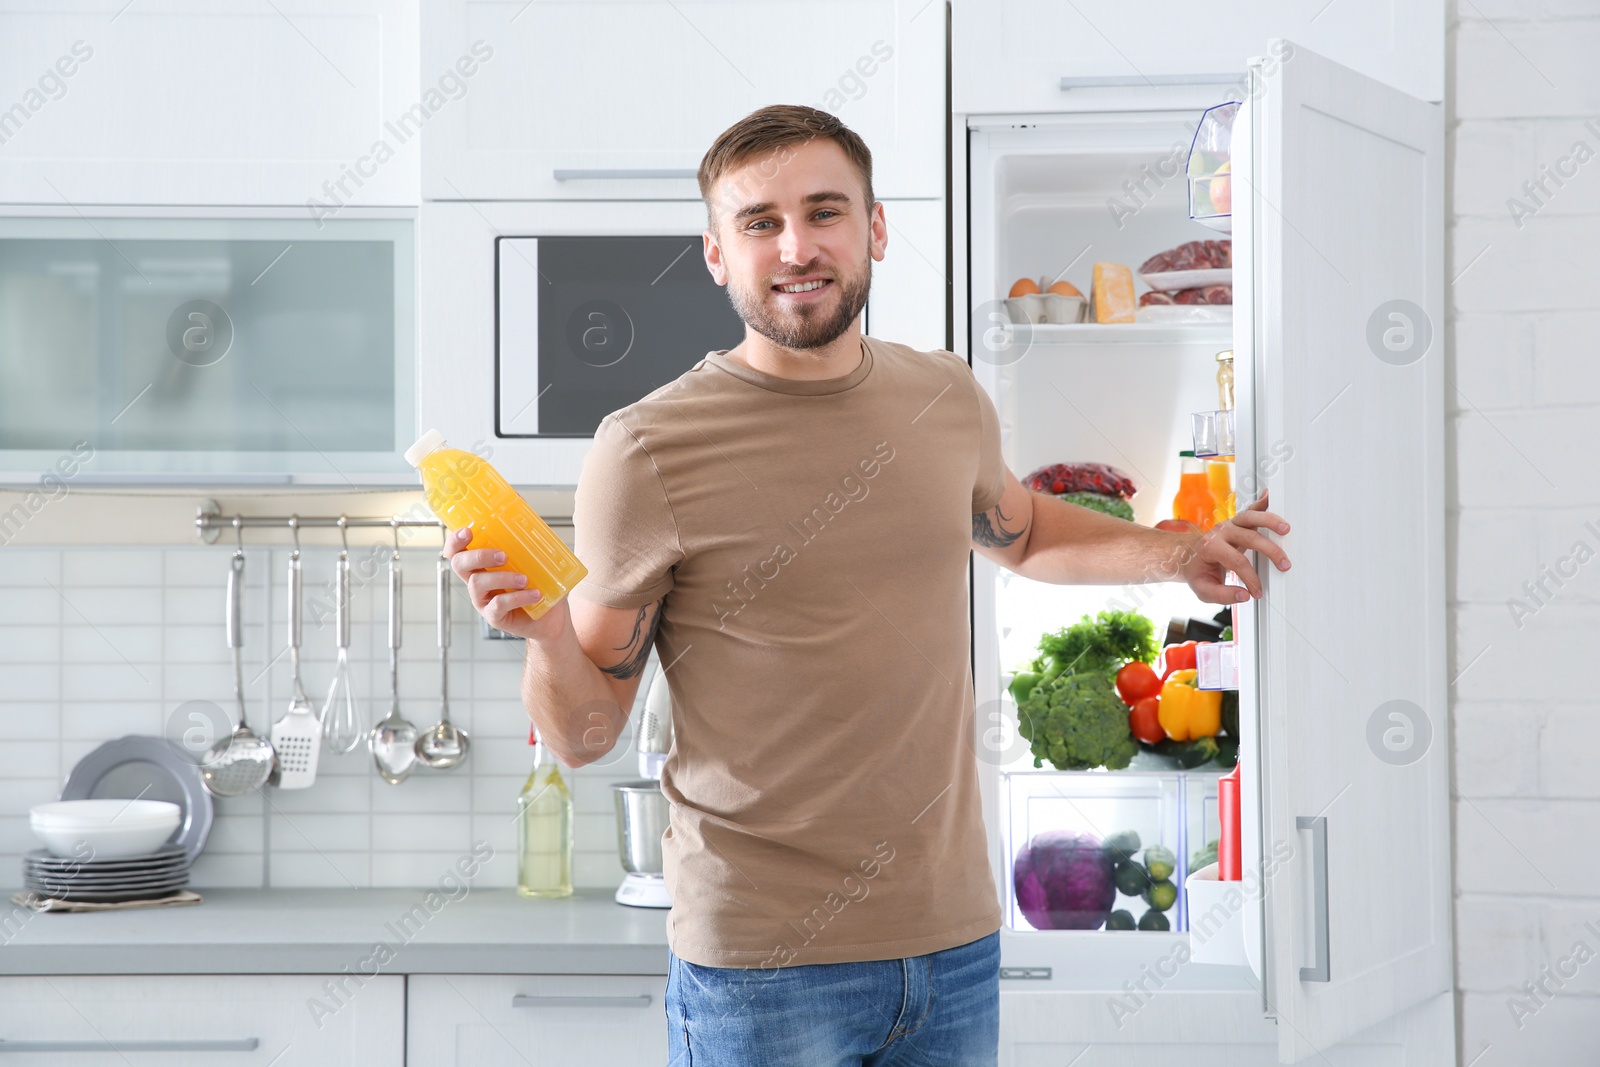 Photo of Man with bottle of juice standing near open refrigerator in kitchen